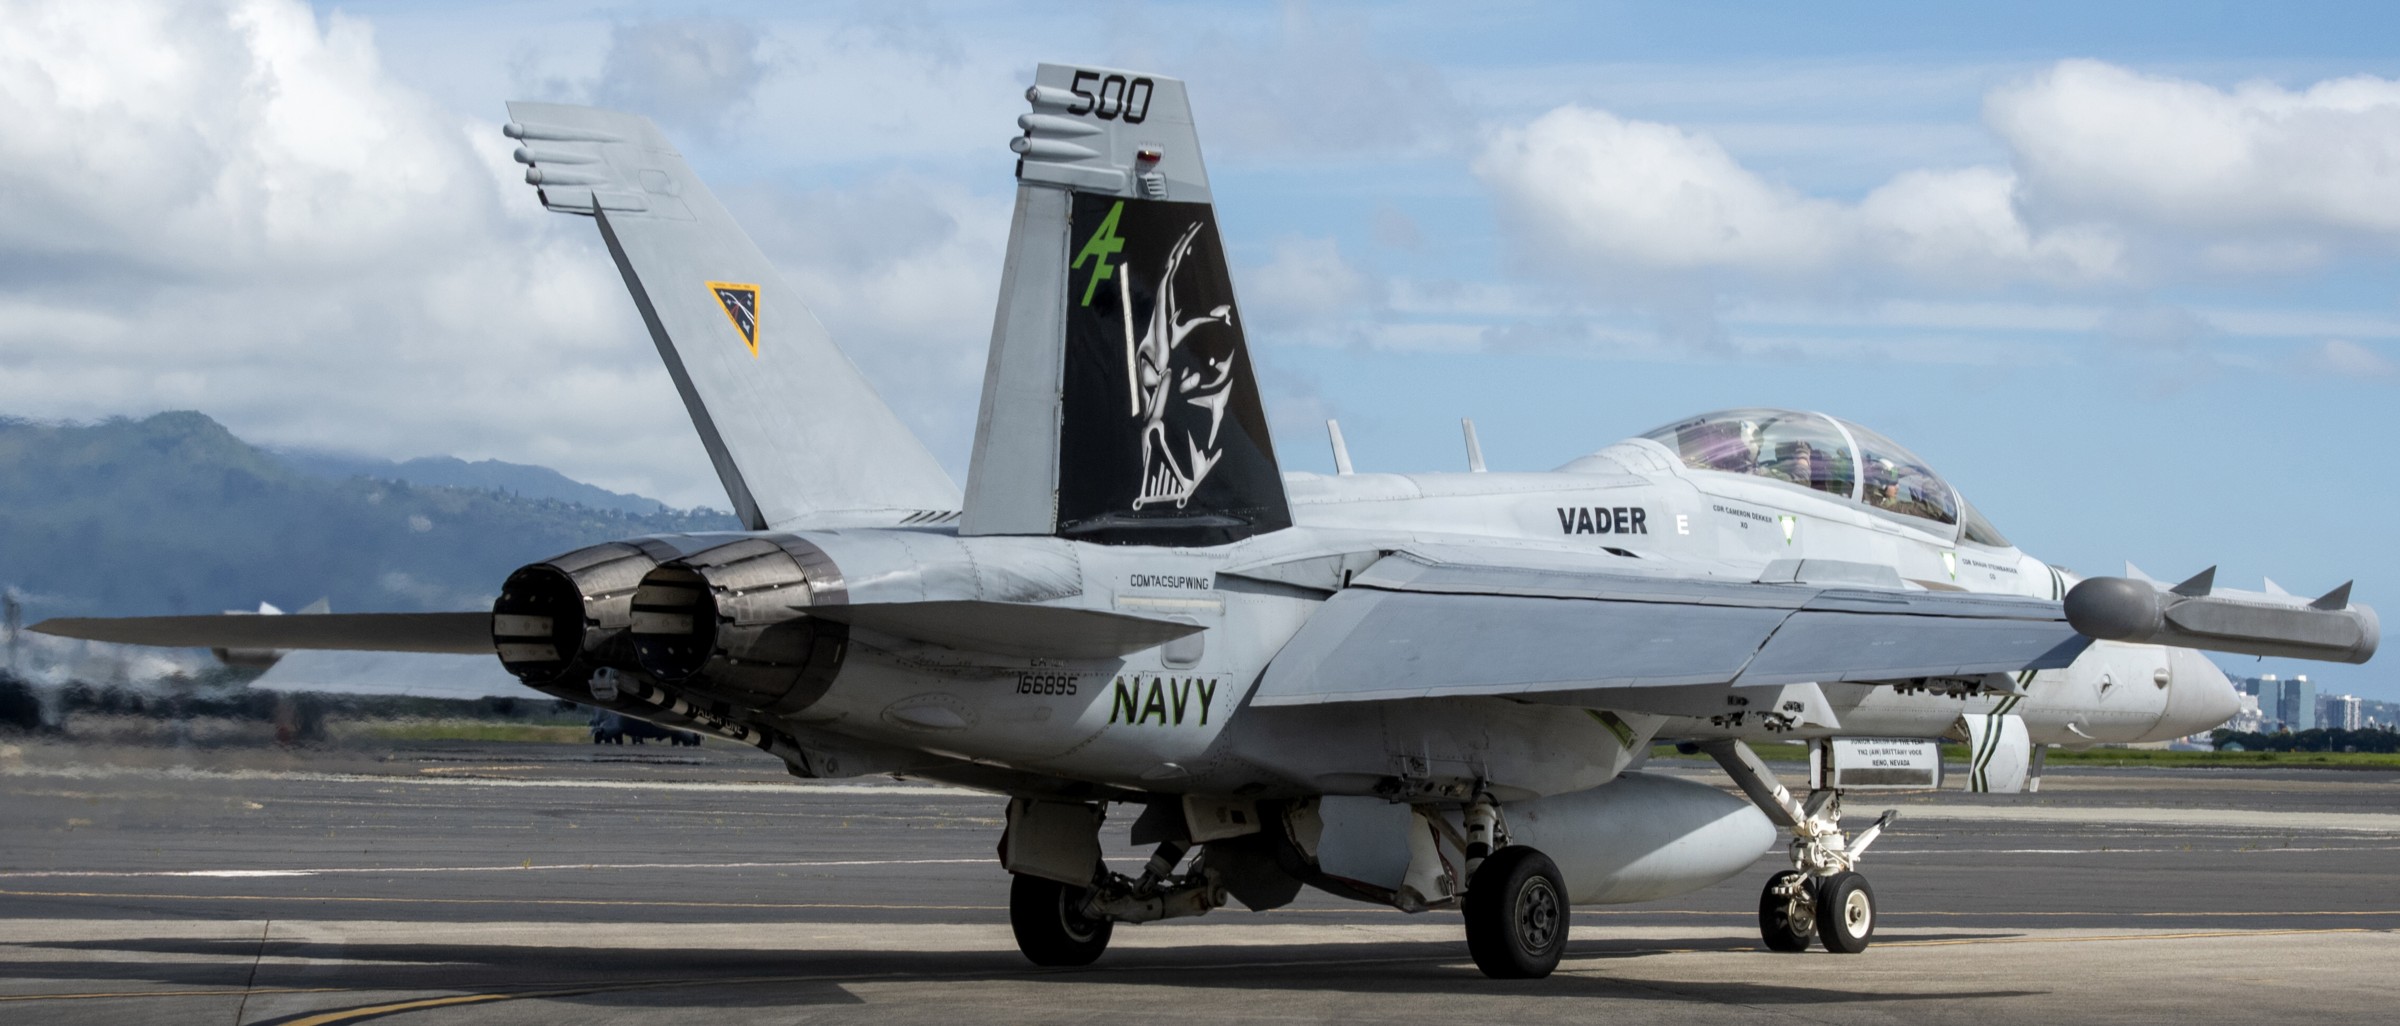 vaq-209 star warriors electronic attack squadron ea-18g growler us navy nas whidbey island tacsupwing 79x